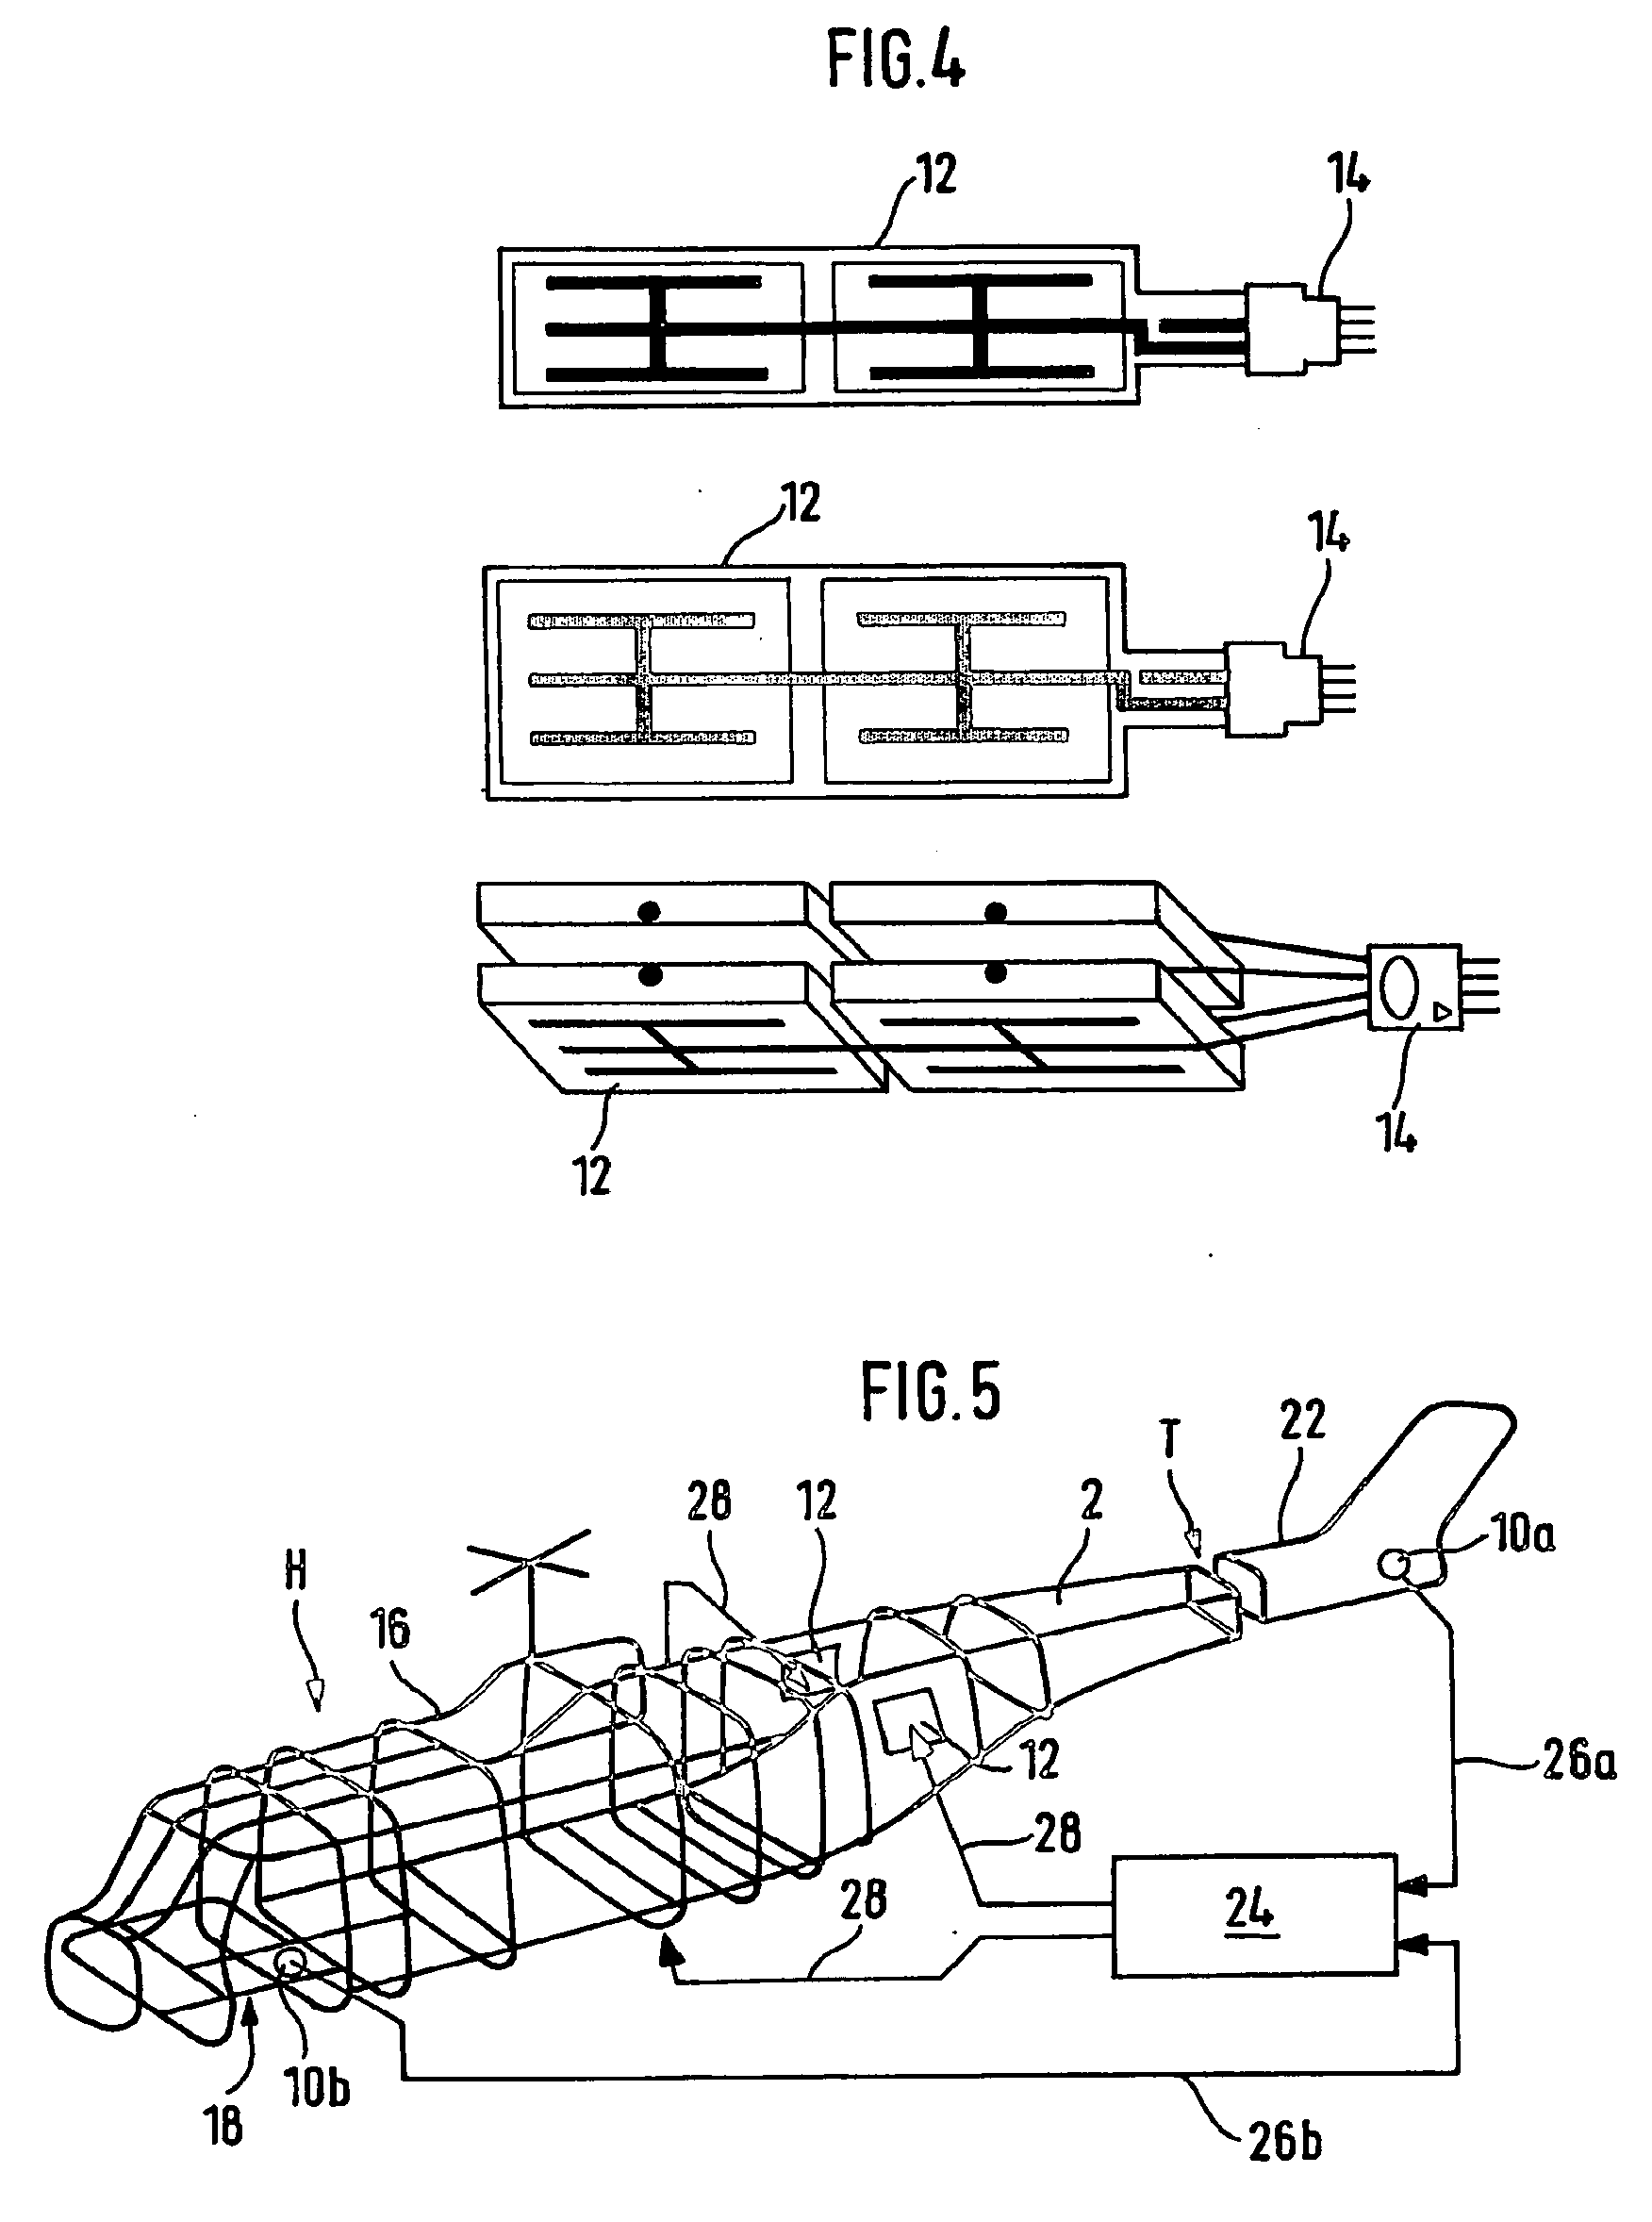 Method for damping rear extension arm vibrations of rotorcraft and rotorcraft with a rear extension arm vibration damping device